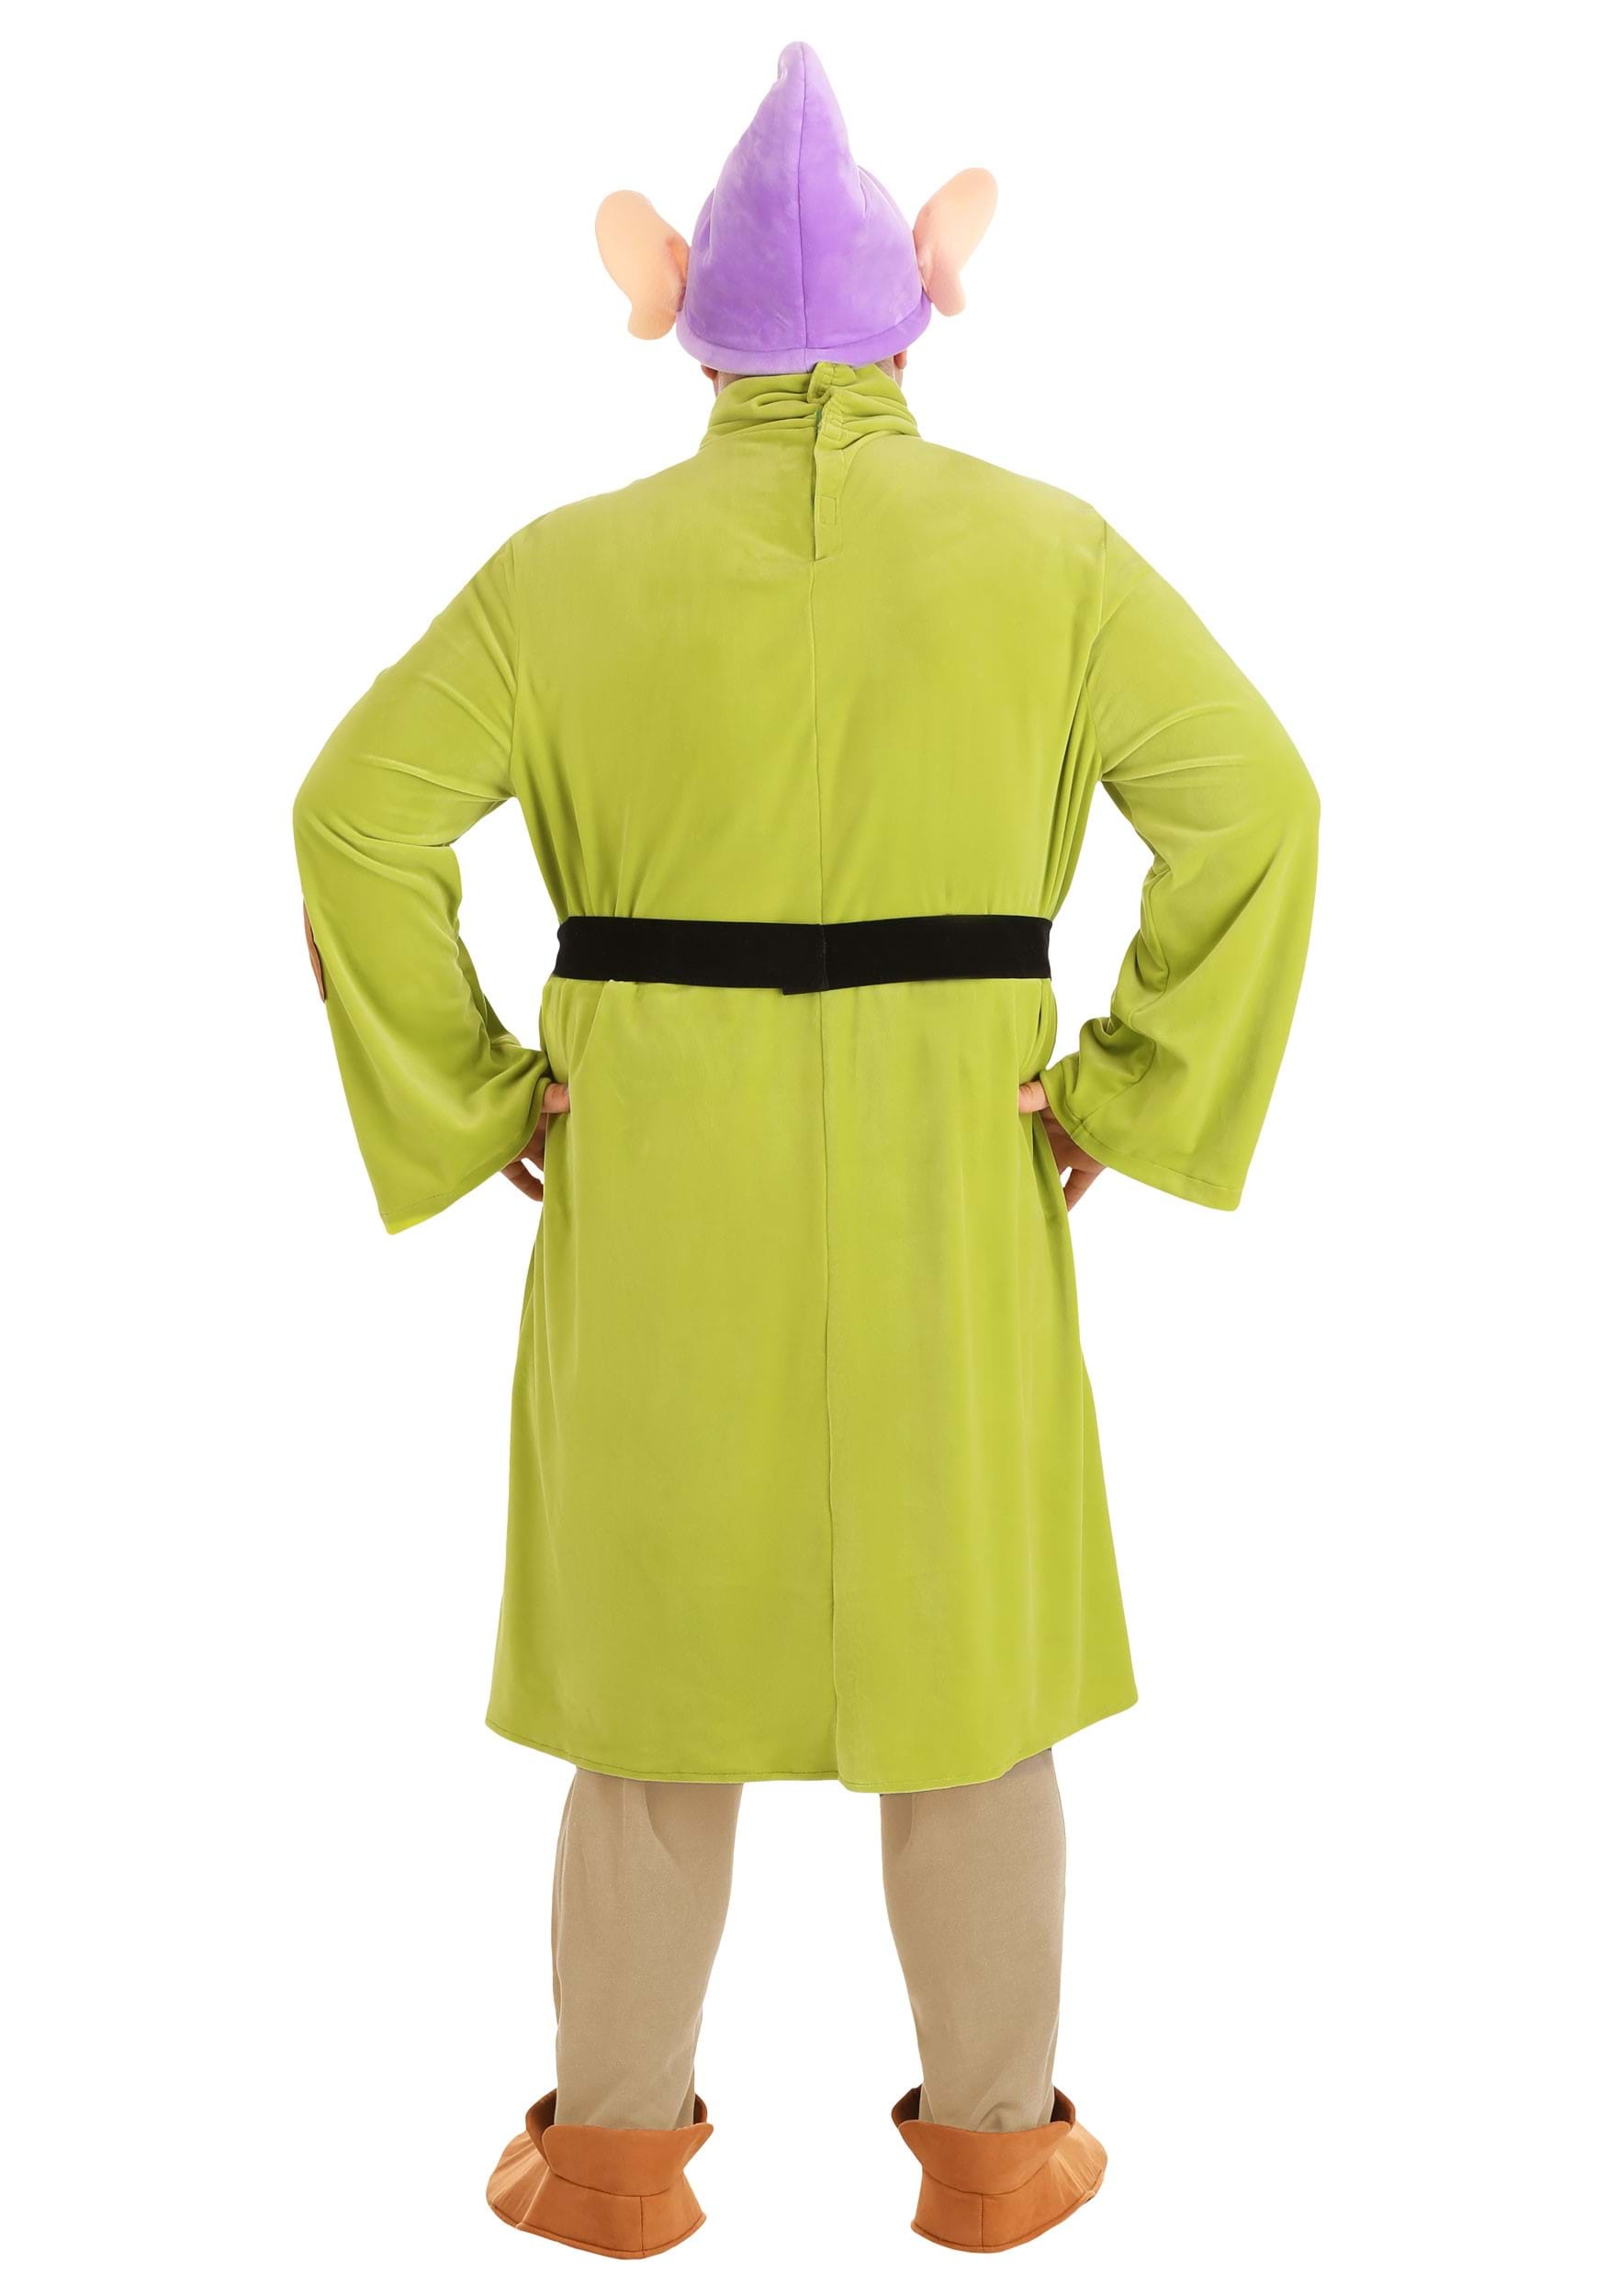 Plus Size Snow White Dopey Costume For Adults